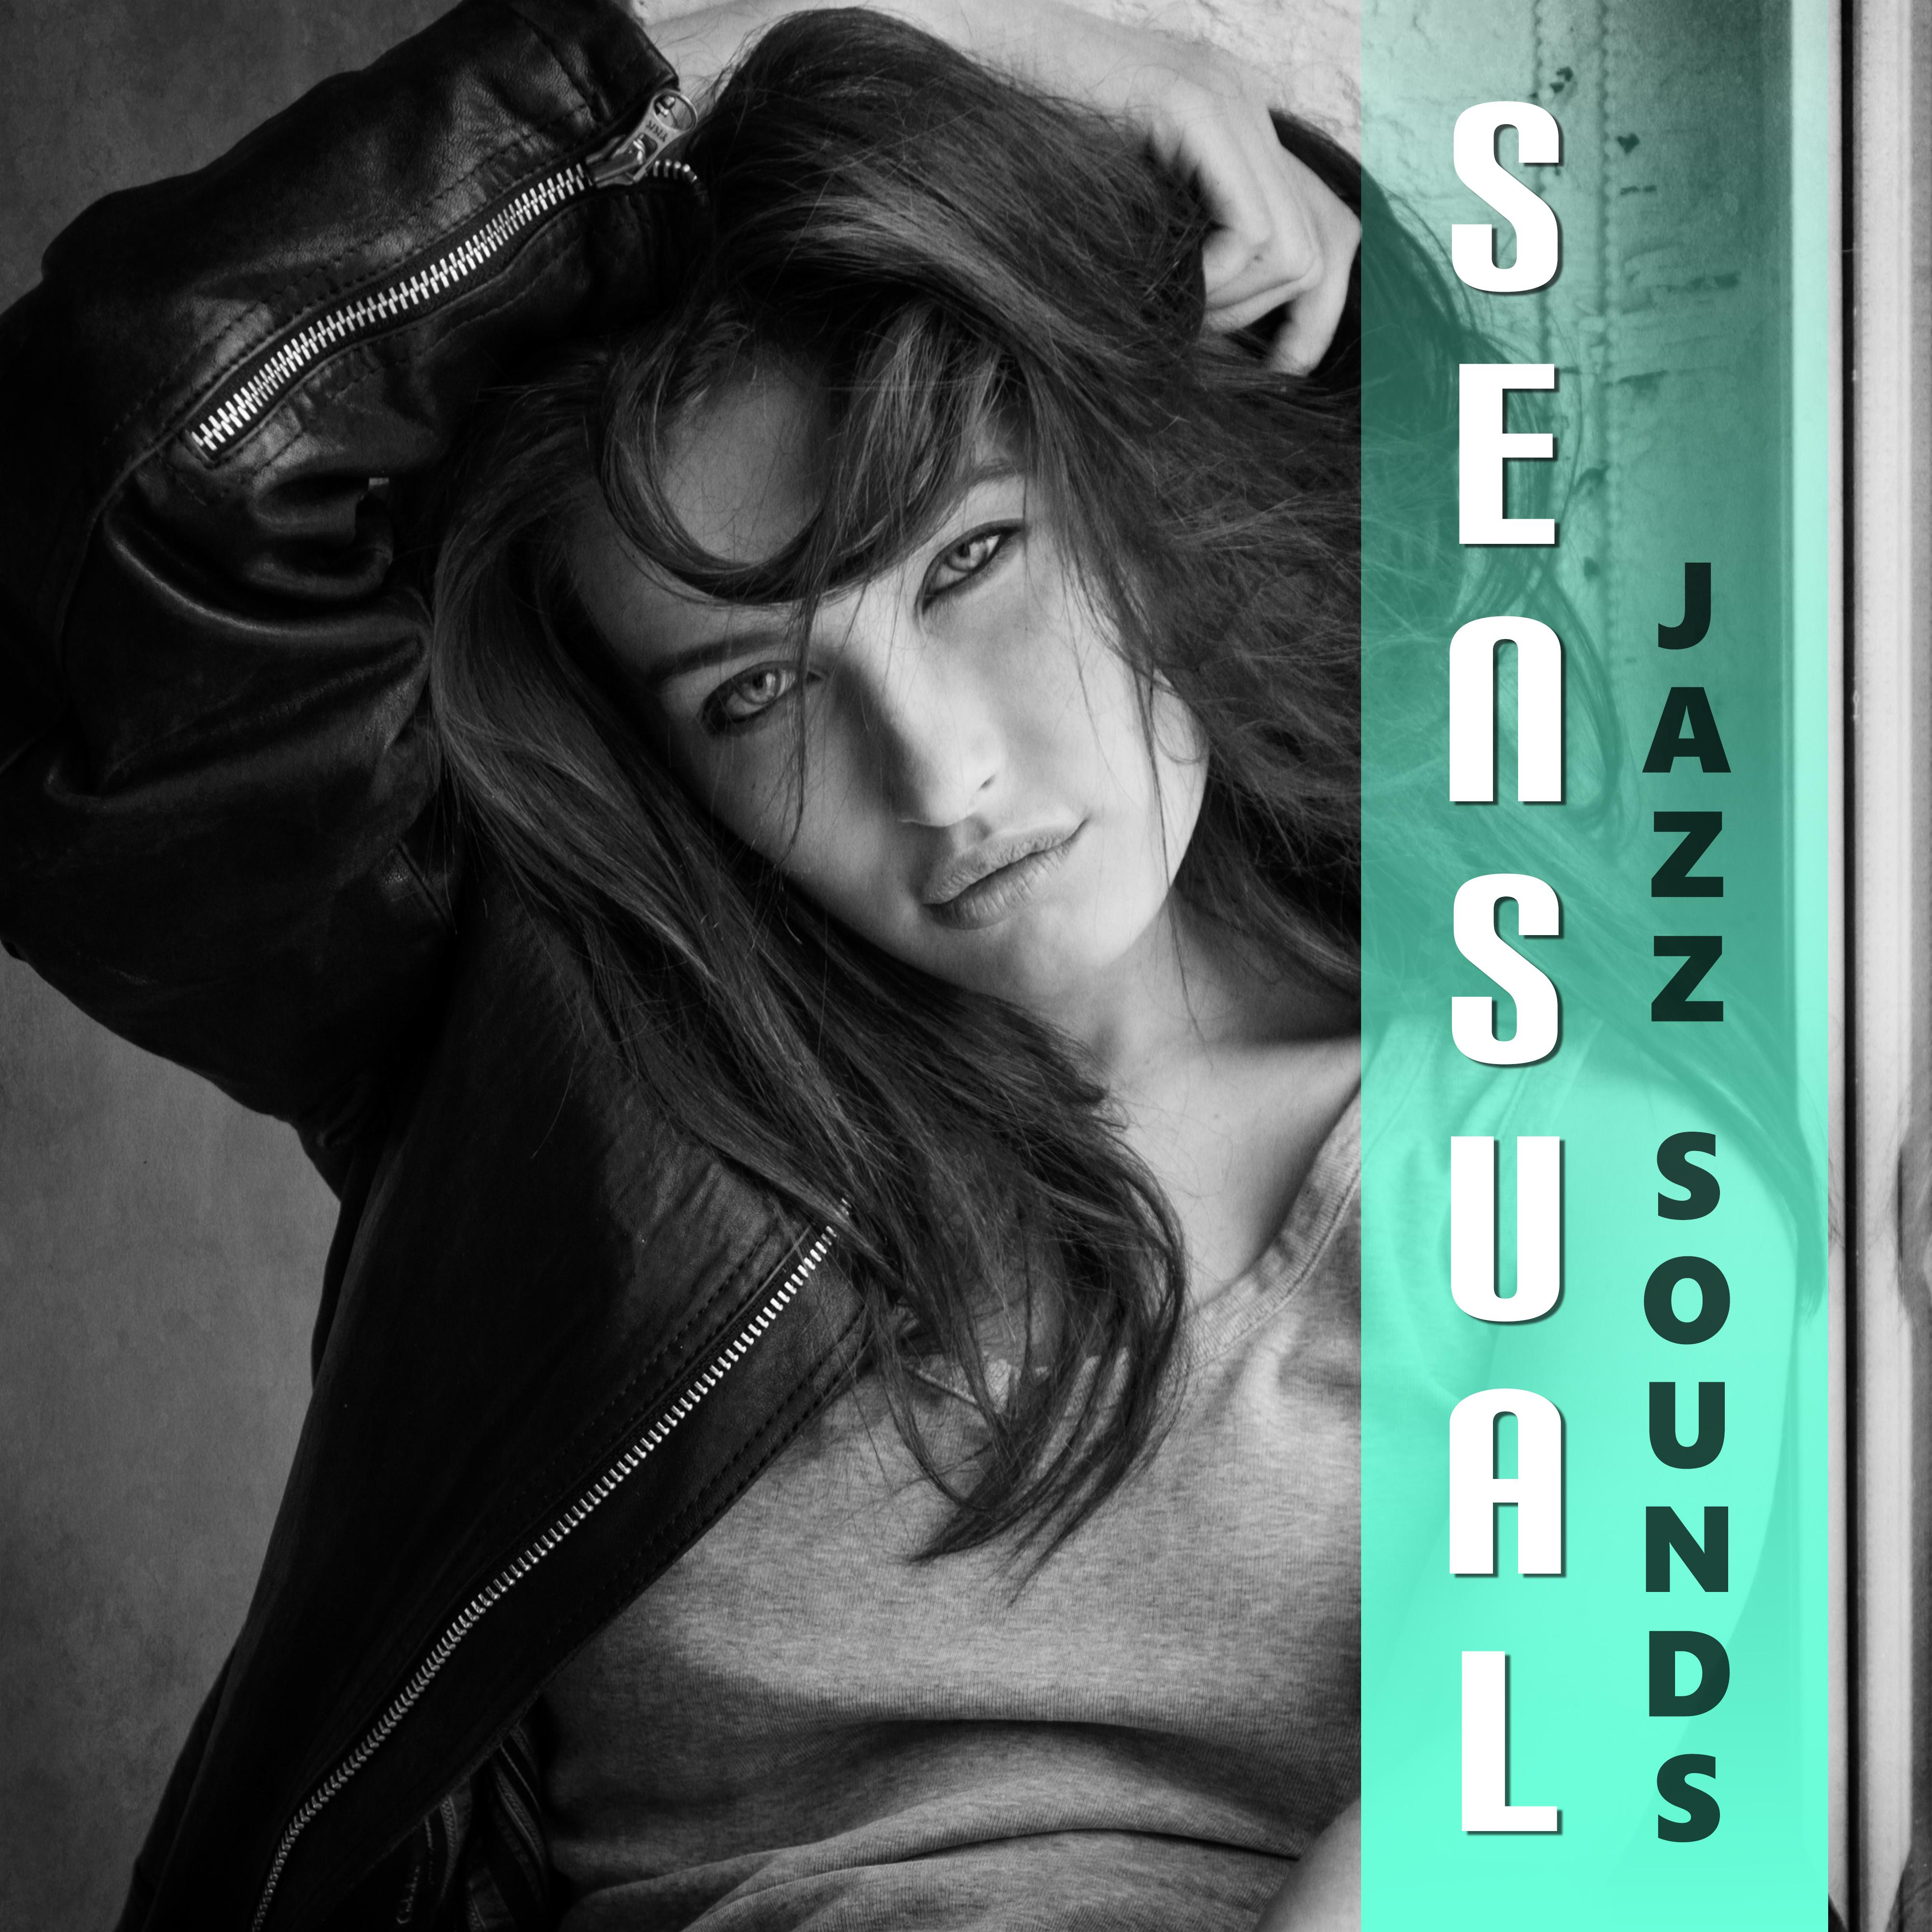 Sensual Jazz Sounds – **** Jazz Music, Sounds for Lovers, Hot Romance, Sensual Instrumental Note